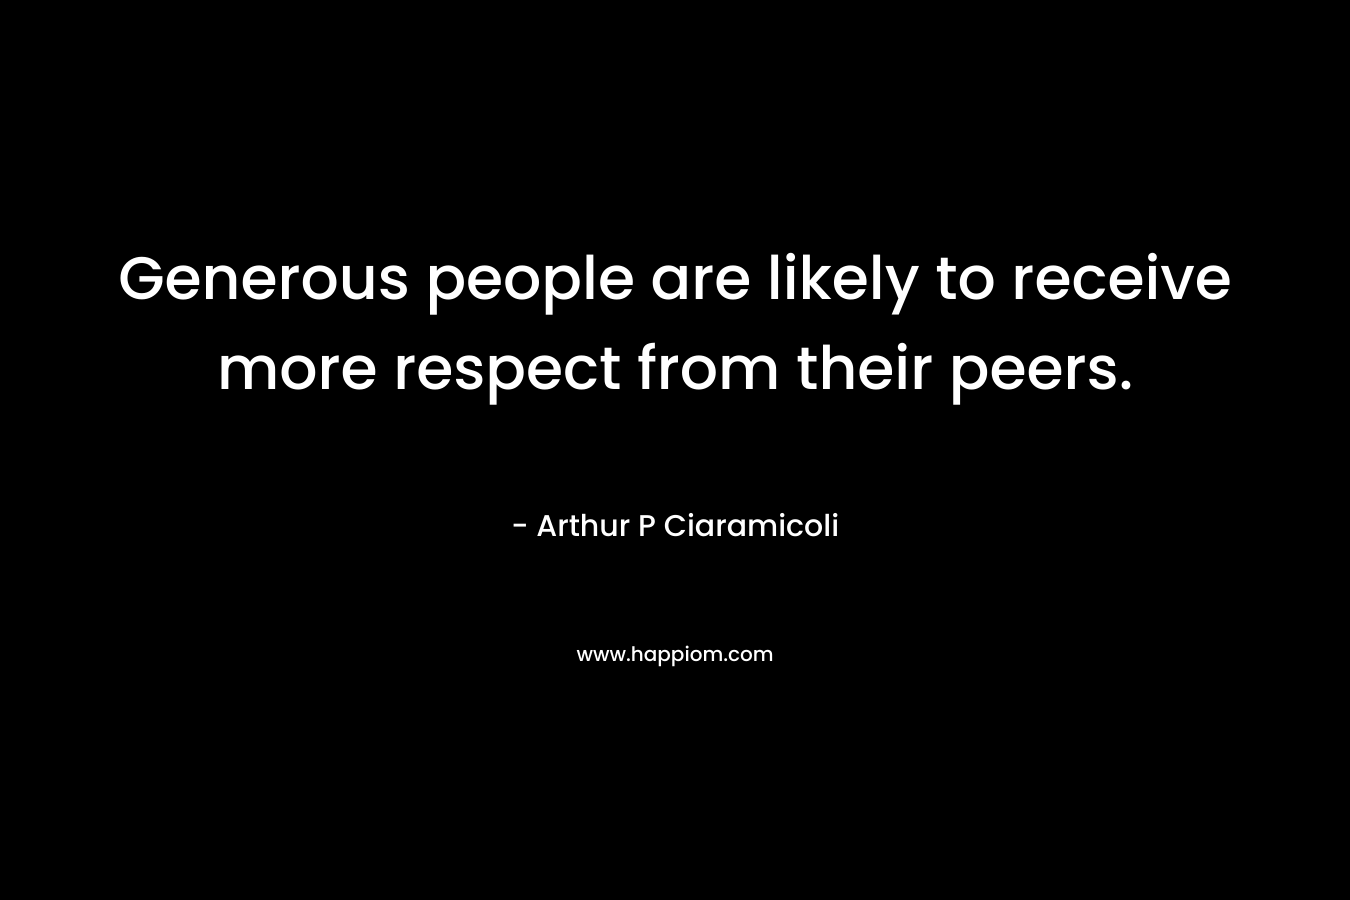 Generous people are likely to receive more respect from their peers. – Arthur P Ciaramicoli